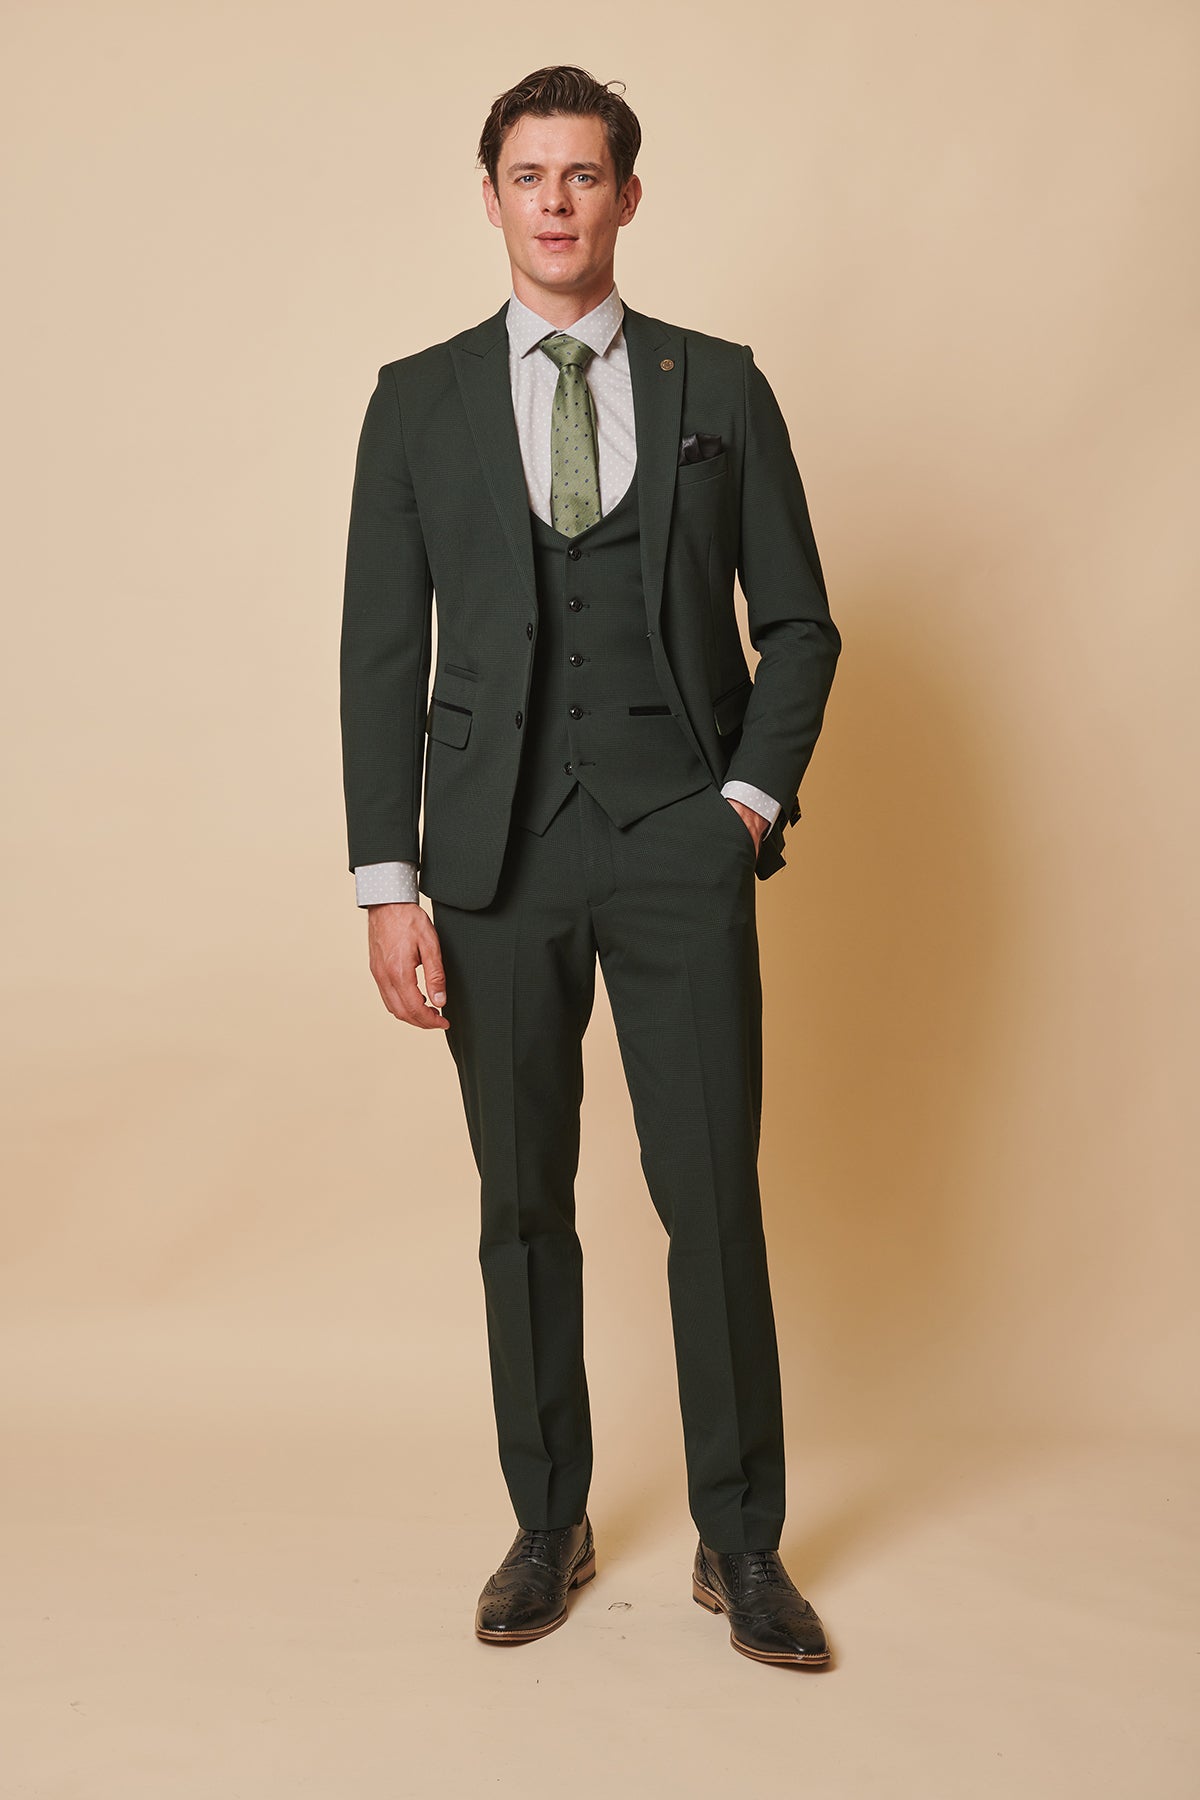 The Cardiff City F.C. Collection - BROMLEY Olive Green Check Suit As Worn By Karlan Grant